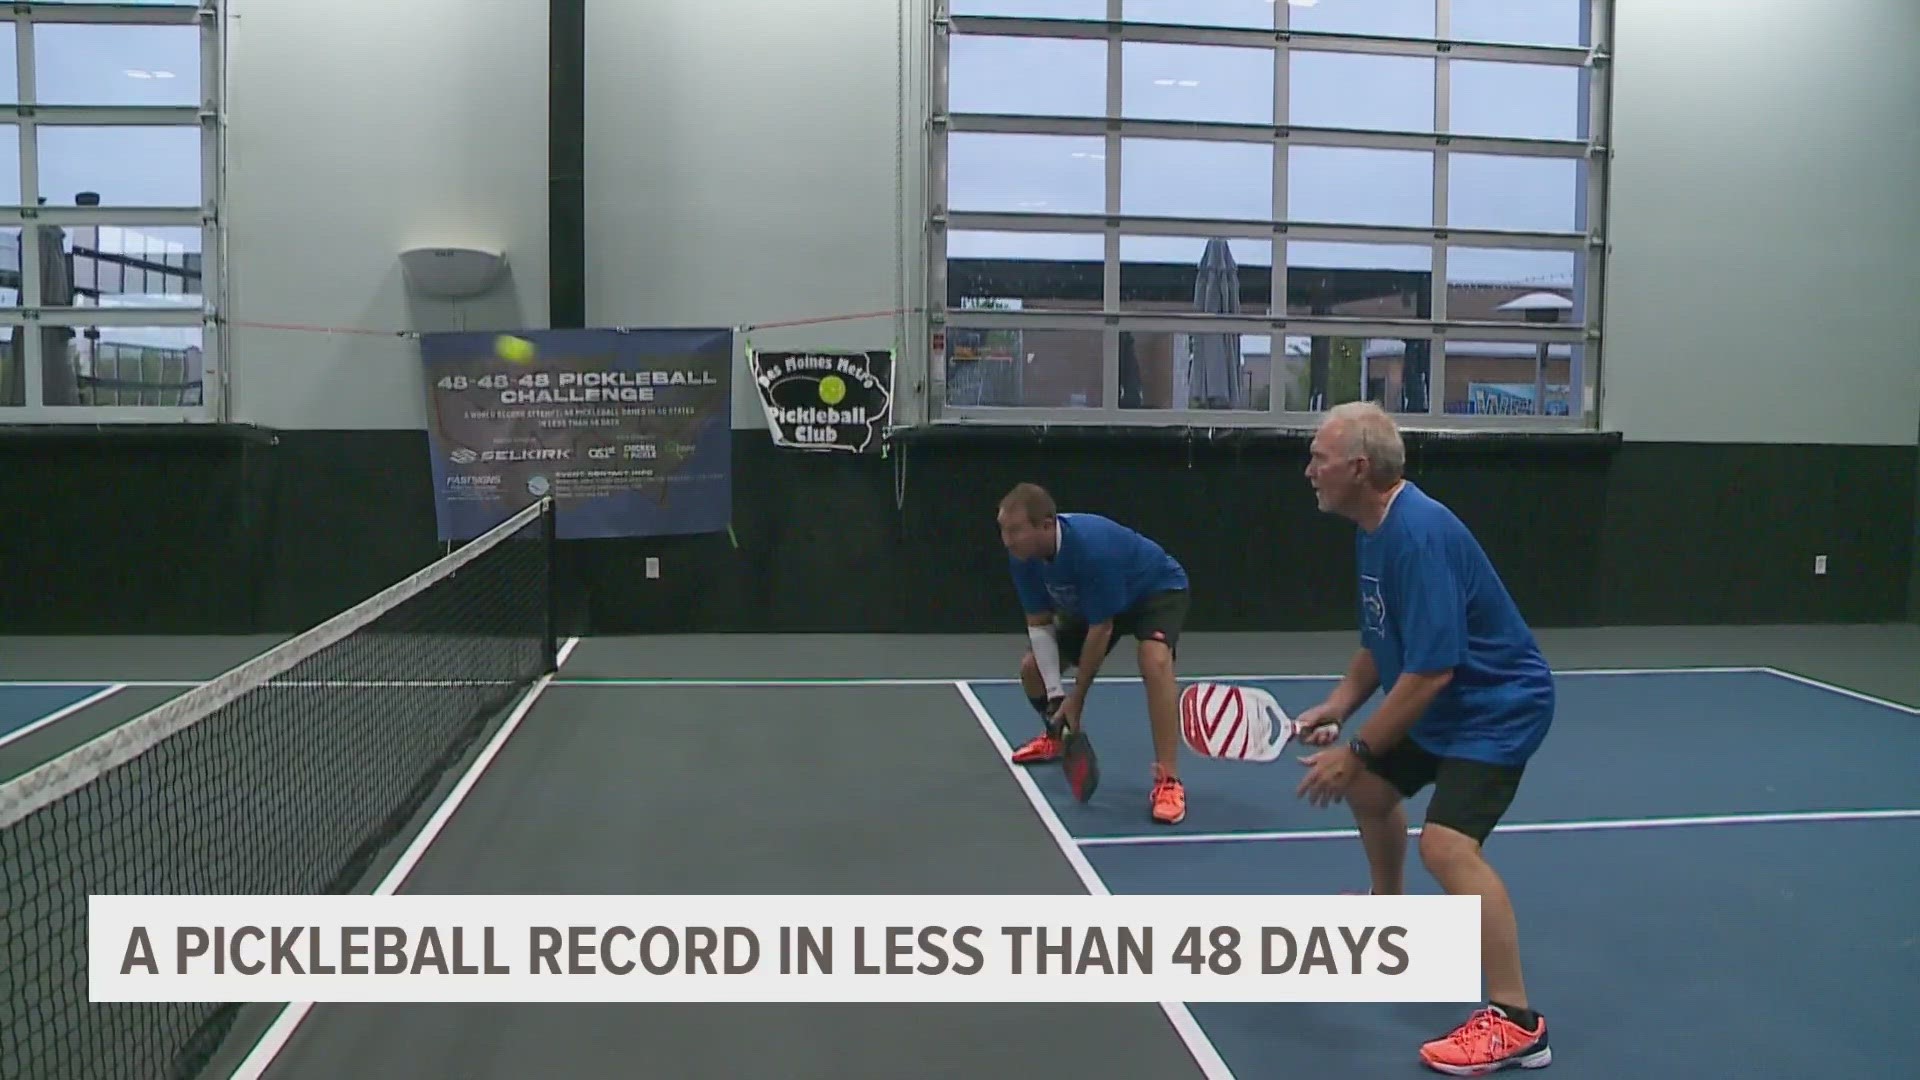 Dean Matt is trying to set the world record for fastest time to play a game of pickleball in all 48 continental U.S. states.